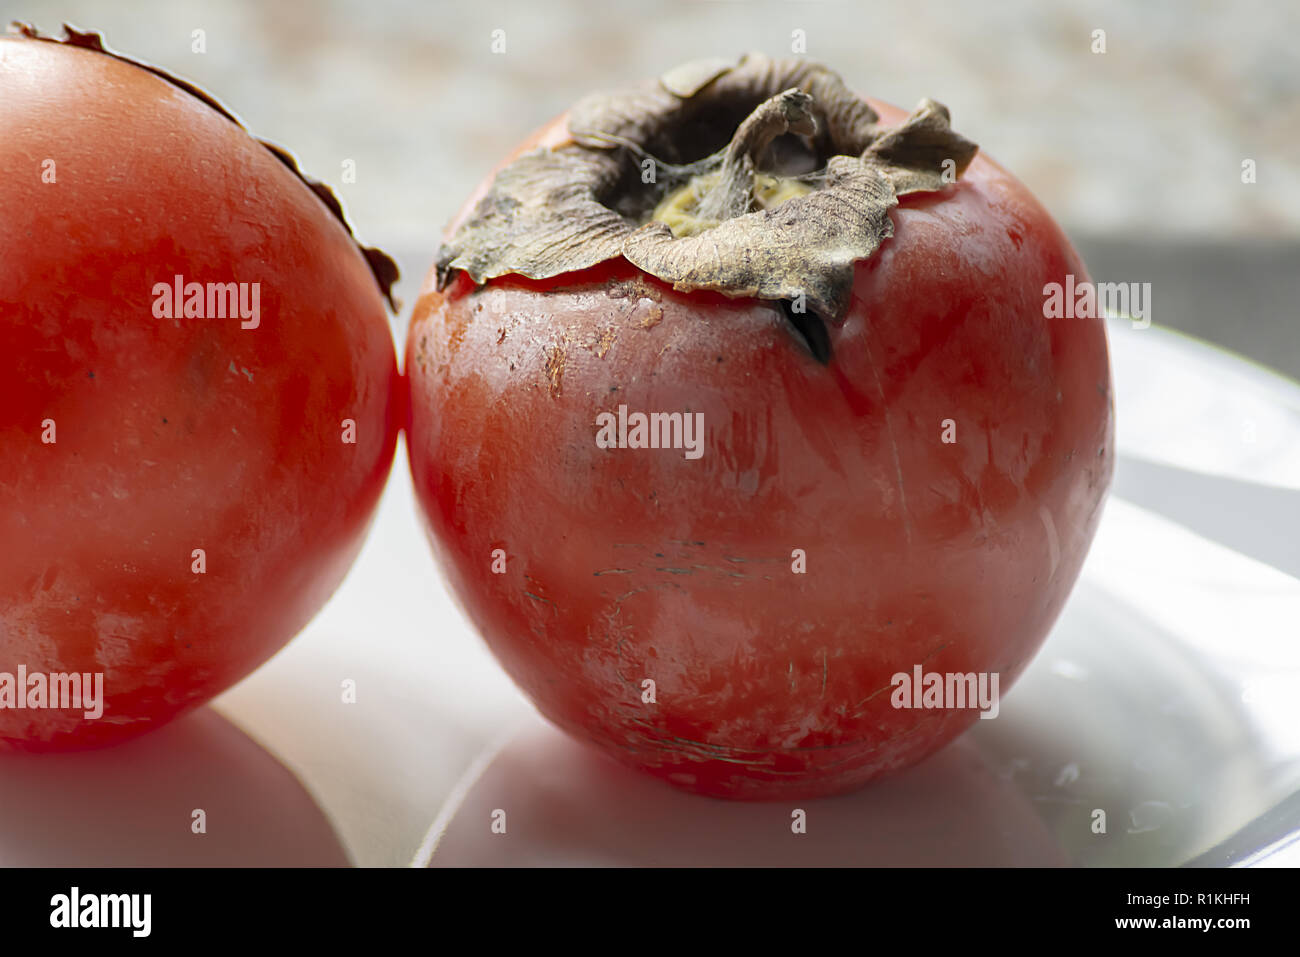 two khaki fruits in the plate close-up Stock Photo